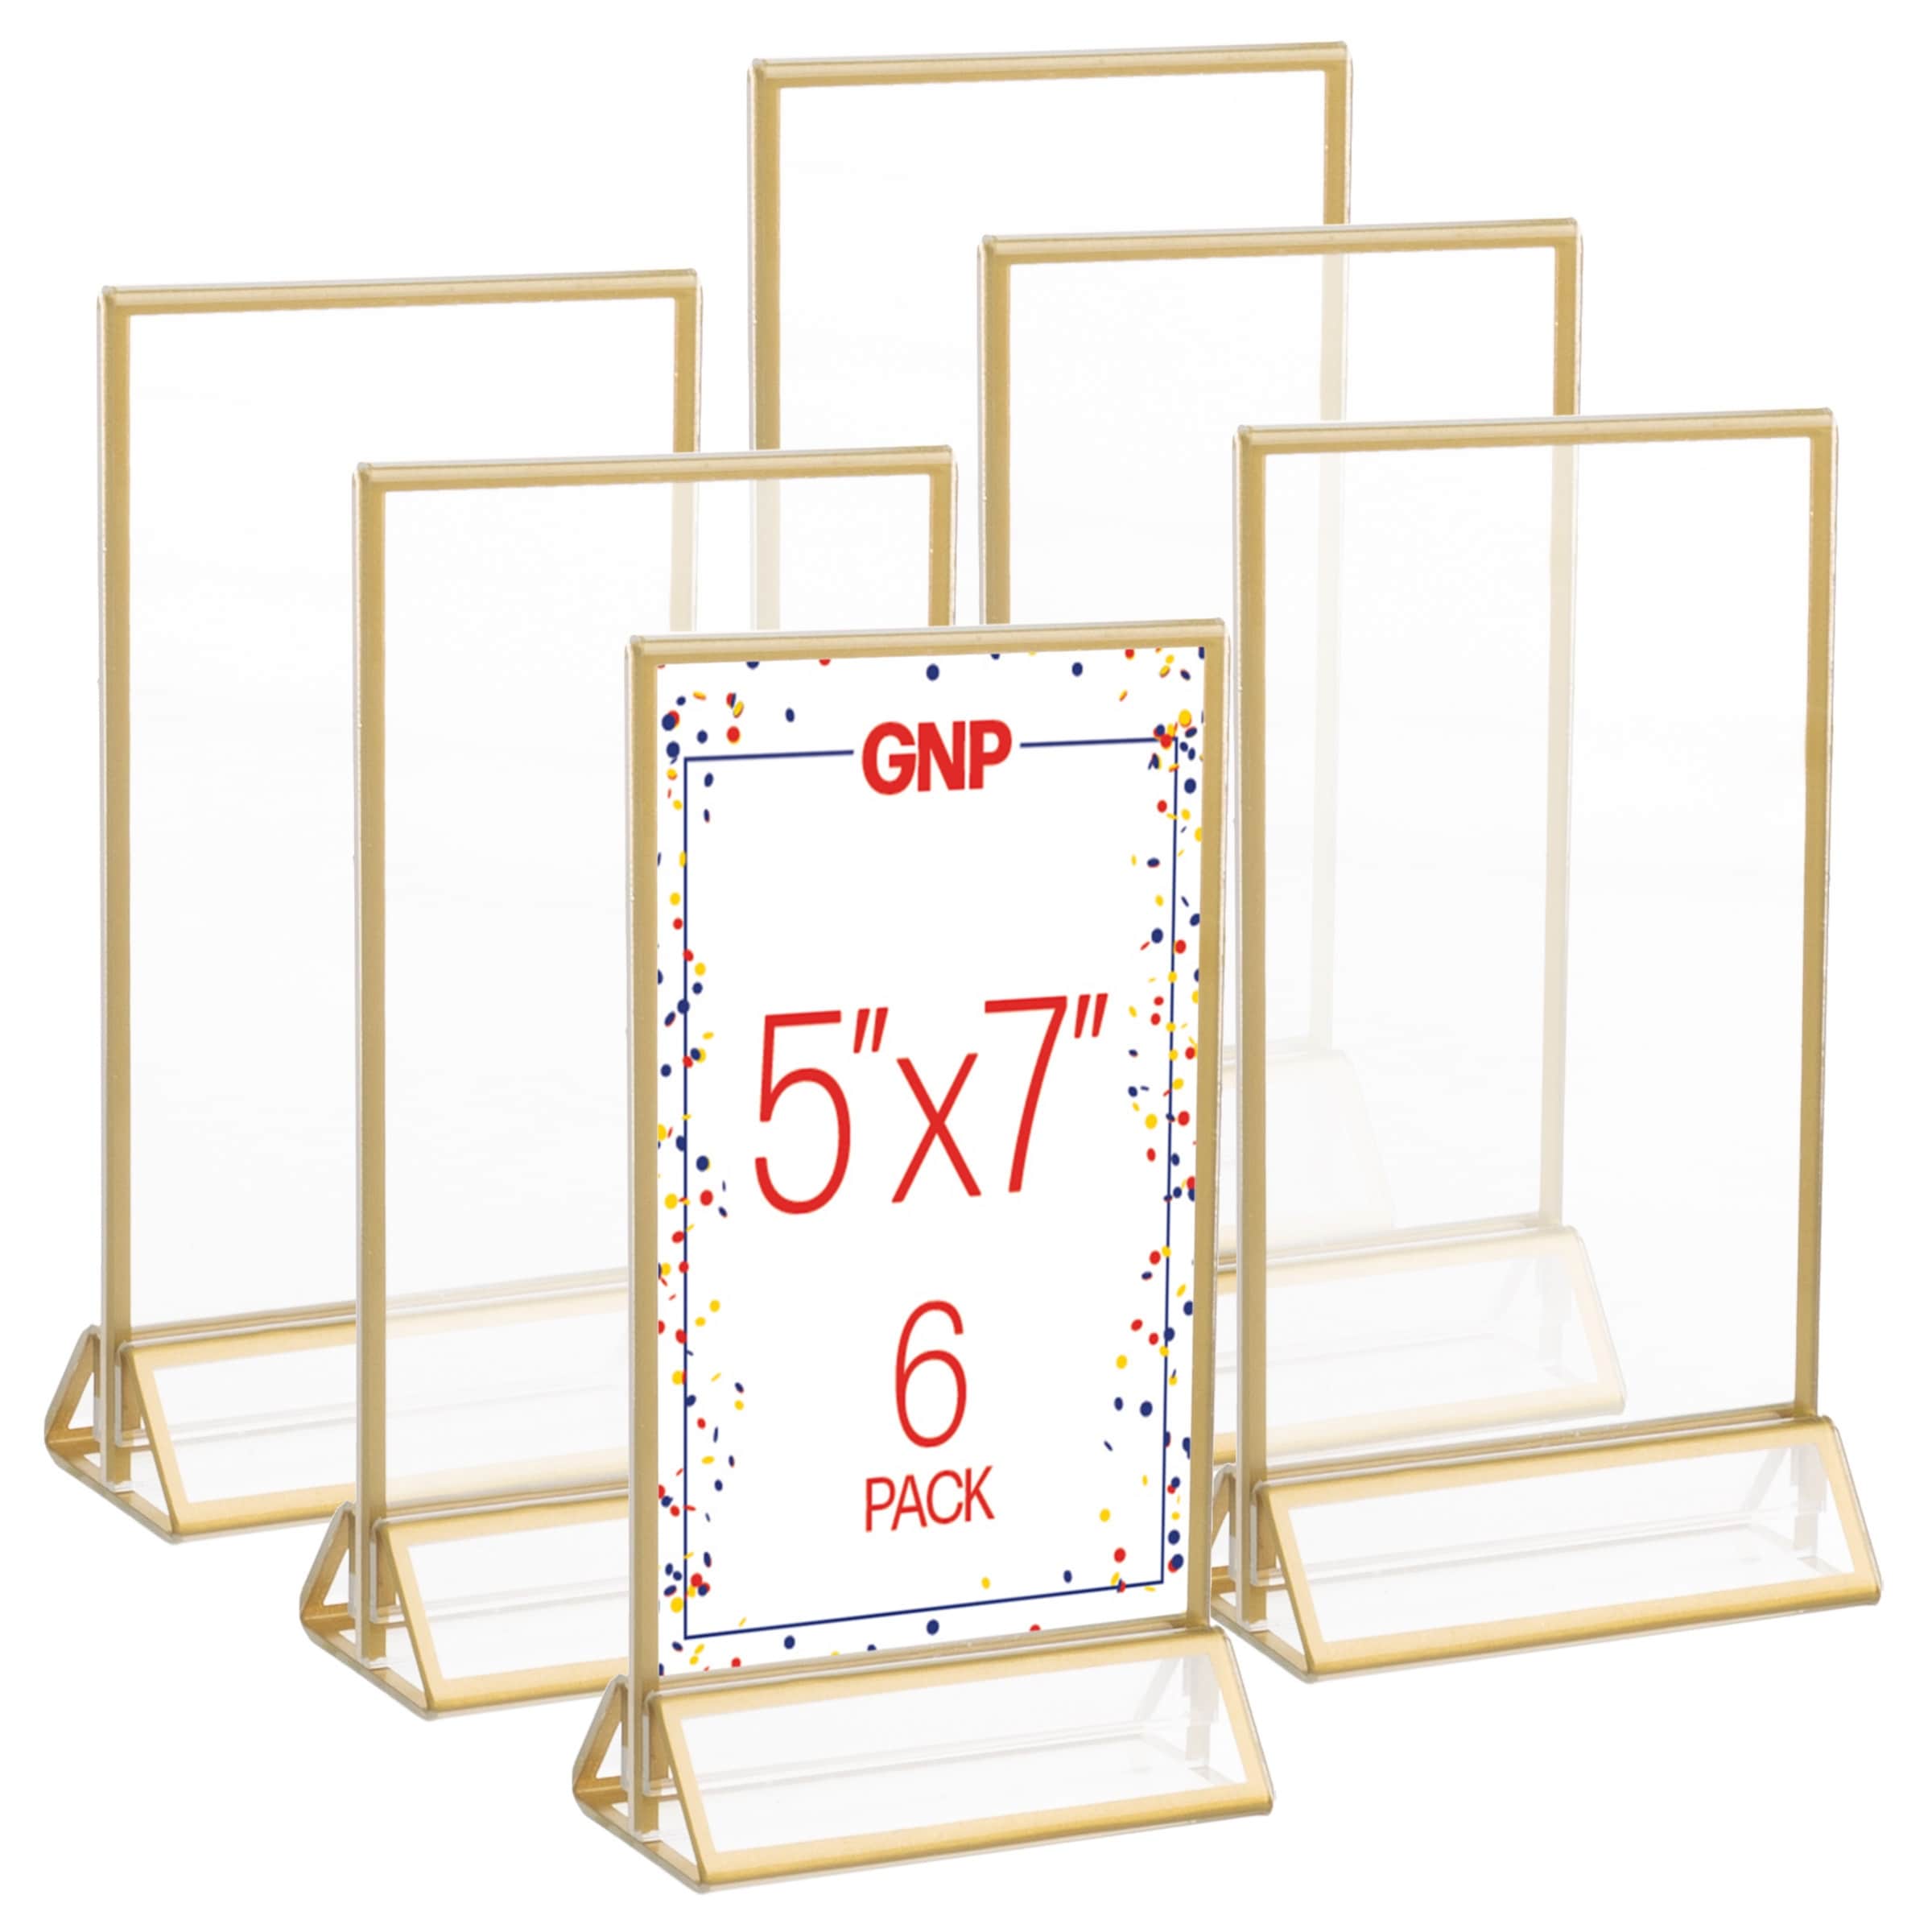 5x7 Picture Frames 6-Pack Floating Frame Set by Great Northern Party (Gold)